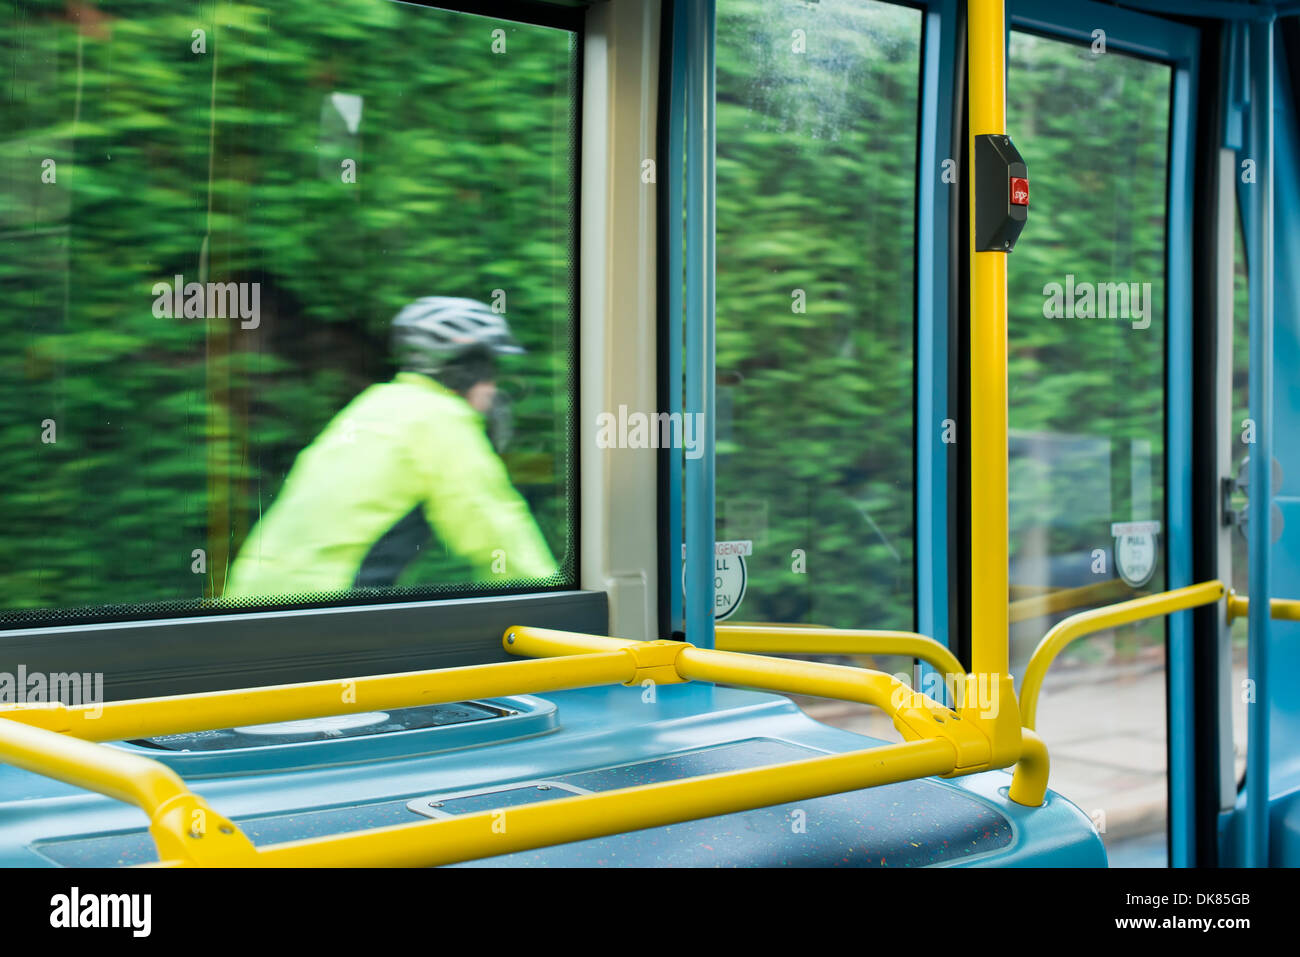 Bus Interior at public transport. Seats in a bus Stock Photo